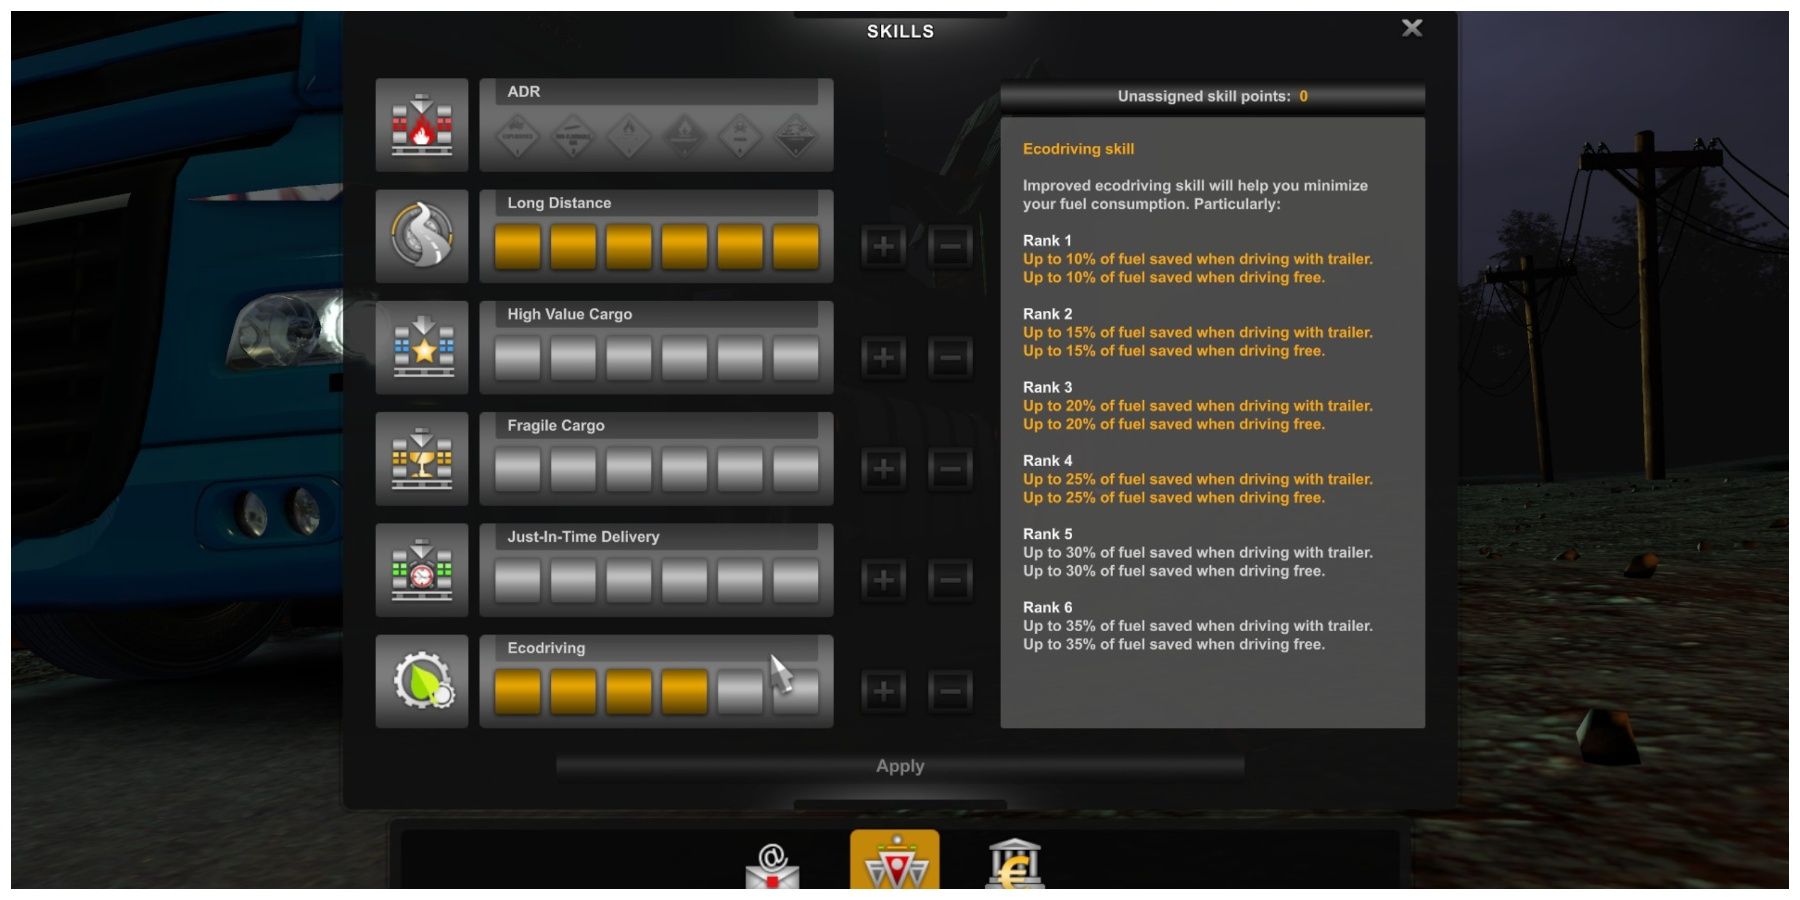 A screen showing the ranks of the Ecodriving skill in Euro Truck Simulator 2